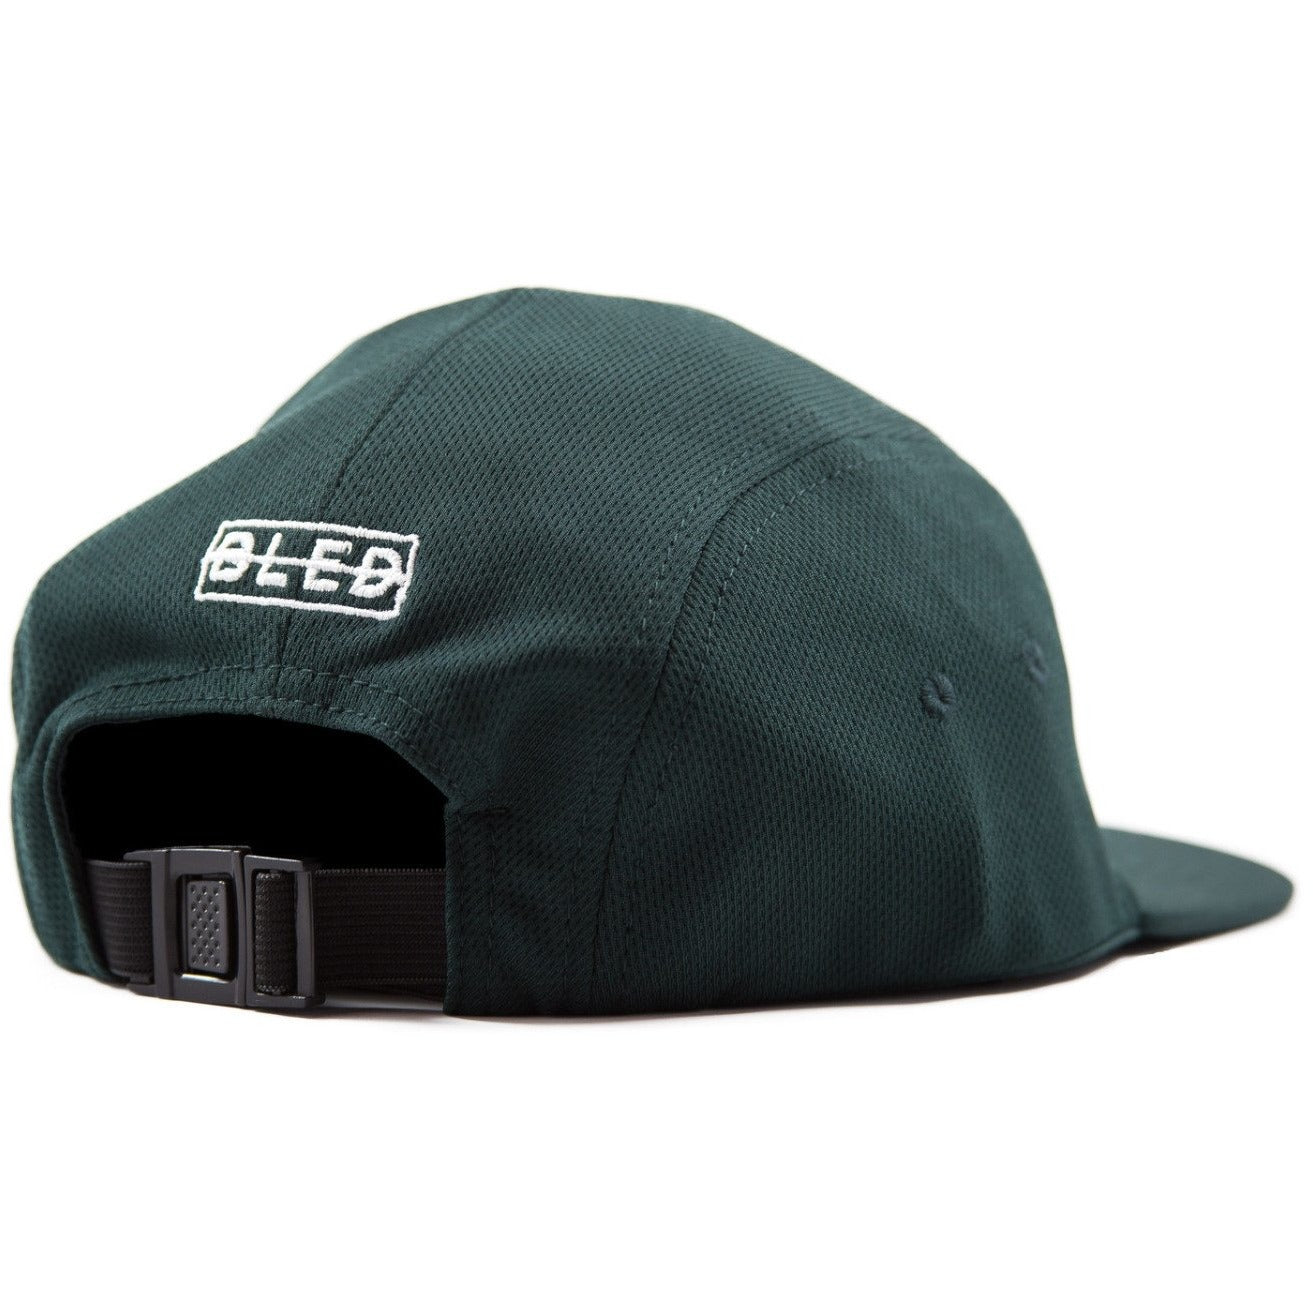 5-panel unconstructed mesh polyester green hat featuring BLED letter logo felt patch on the front and BLED logo embroidered on the back with adjustable strap, skateboards, hype, skate, streetwear